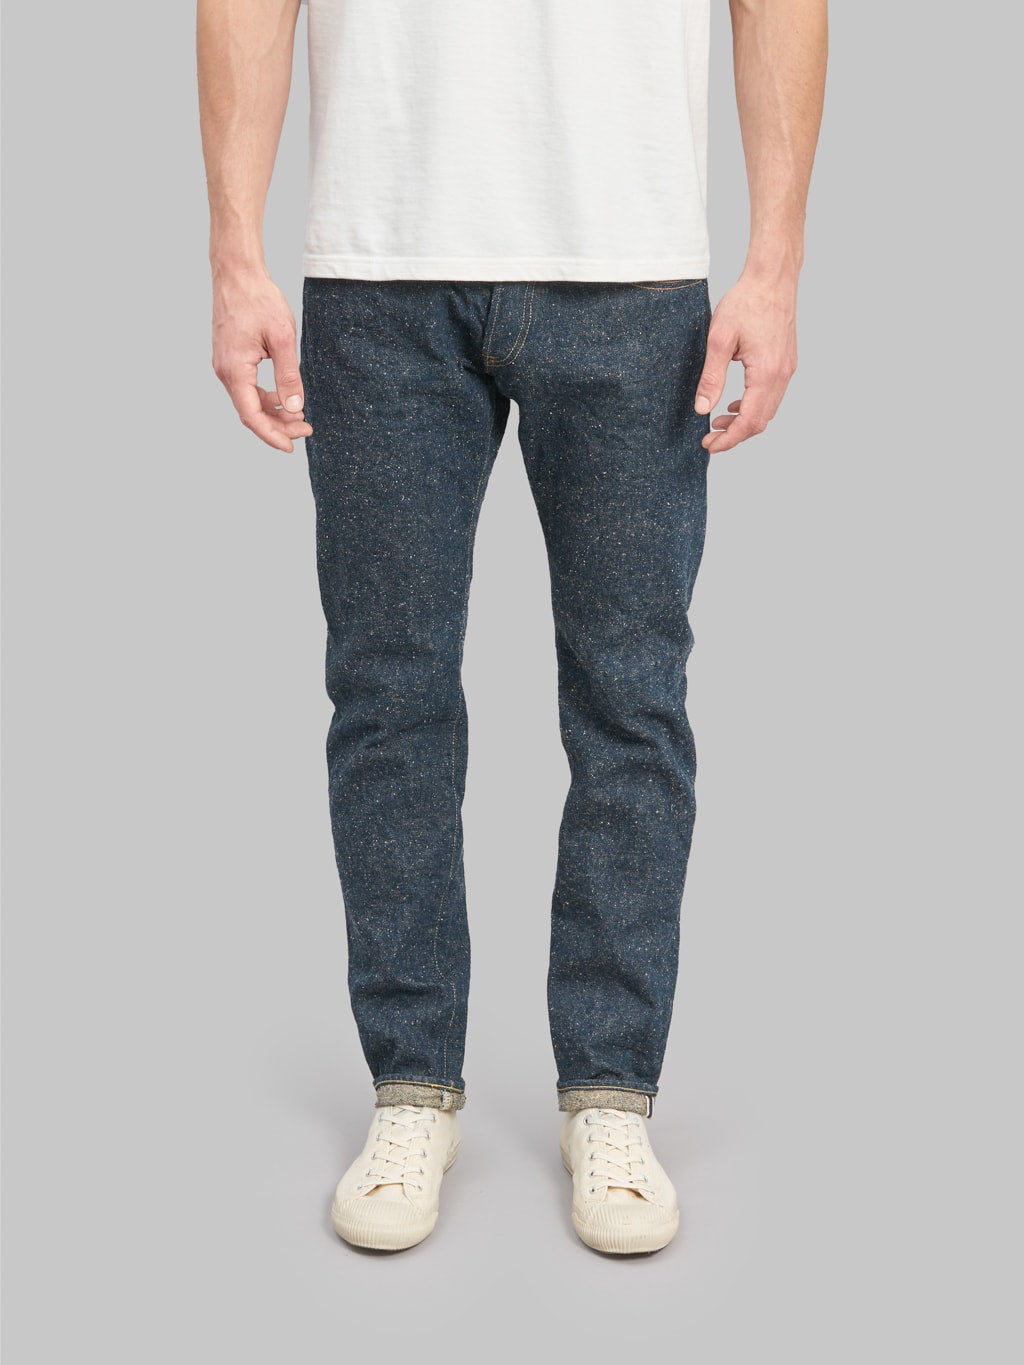 ONI Denim 622-CCD "Crushed Concrete Denim" 14.7oz Relaxed Tapered Jeans